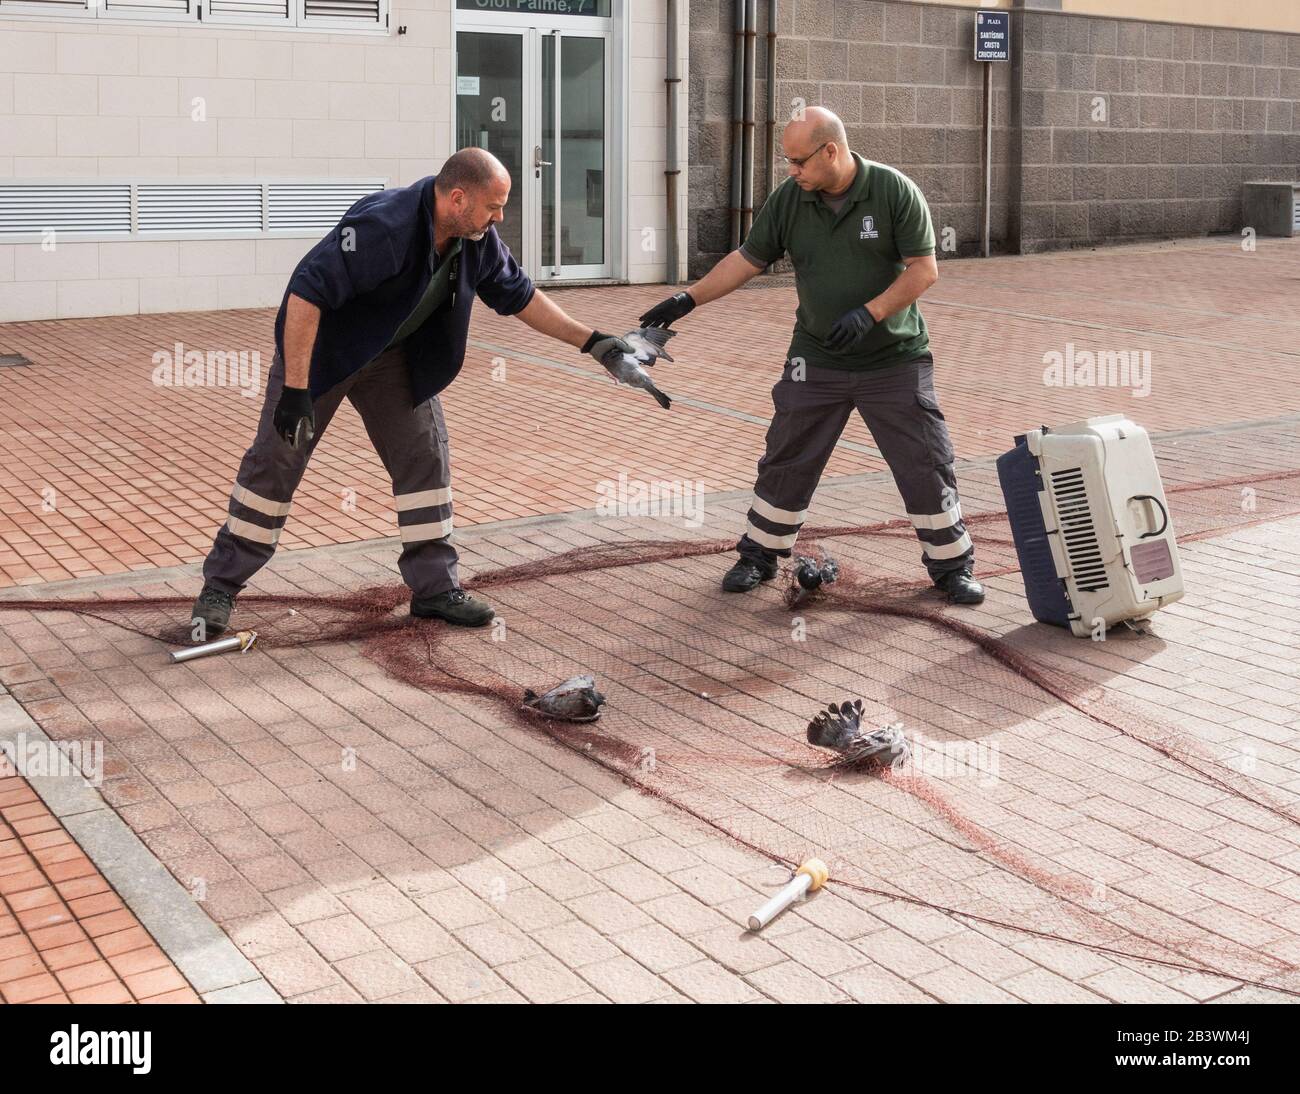 Local authority (council) workers catching feral pigeons with net attached to weights launched from pistons using compressed air. Stock Photo